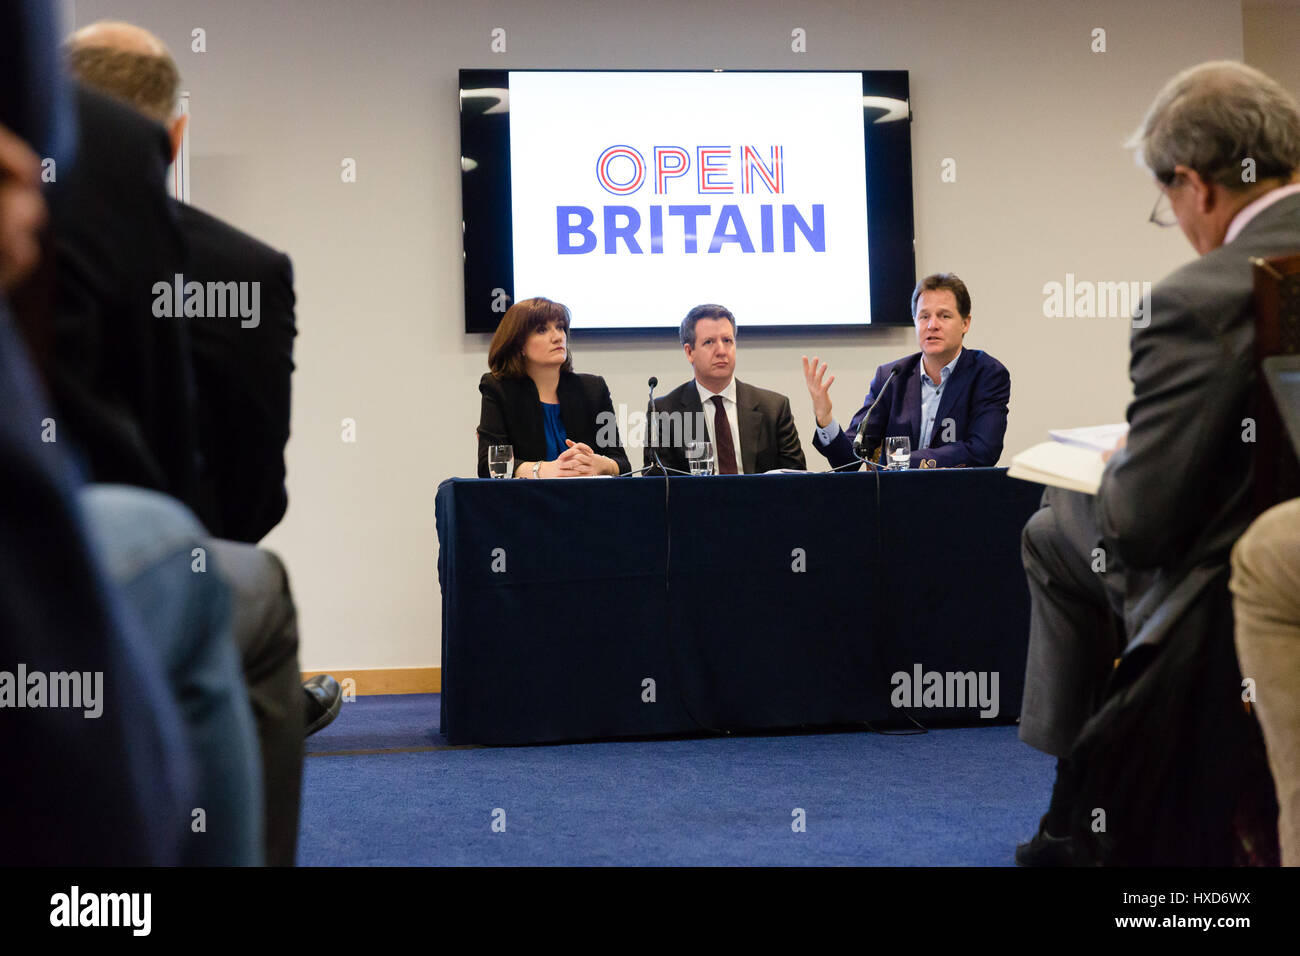 London, UK. 28th March 2017. Nicky Morgan, Chris Leslie and Nick Clegg at the Open Britain press conference. Leading supporters of the Open Britain campaign, Nicky Morgan MP, Chris Leslie MP and Nick Clegg MP hosted a press conference in which they answered questions about the Open Britain campaign’s publication: The Government’s Brexit Contract with the British people. Credit: Vickie Flores/Alamy Live News Stock Photo